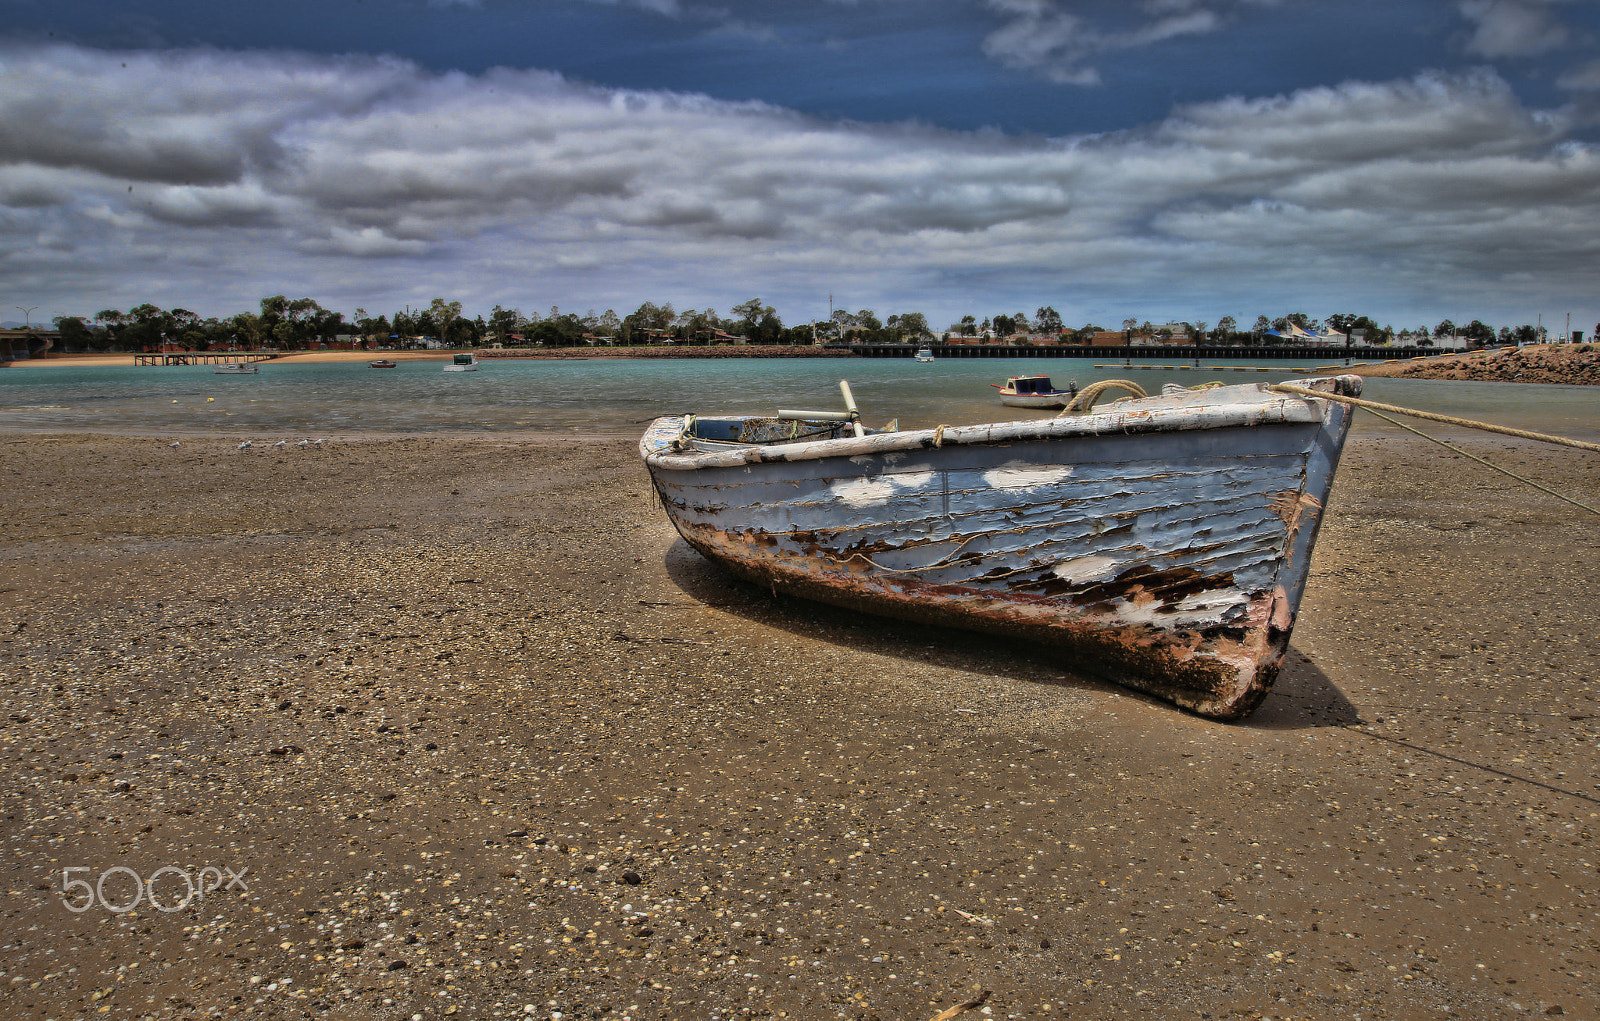 Canon EOS 6D + Sigma 24-105mm f/4 DG OS HSM | A sample photo. Old boat photography